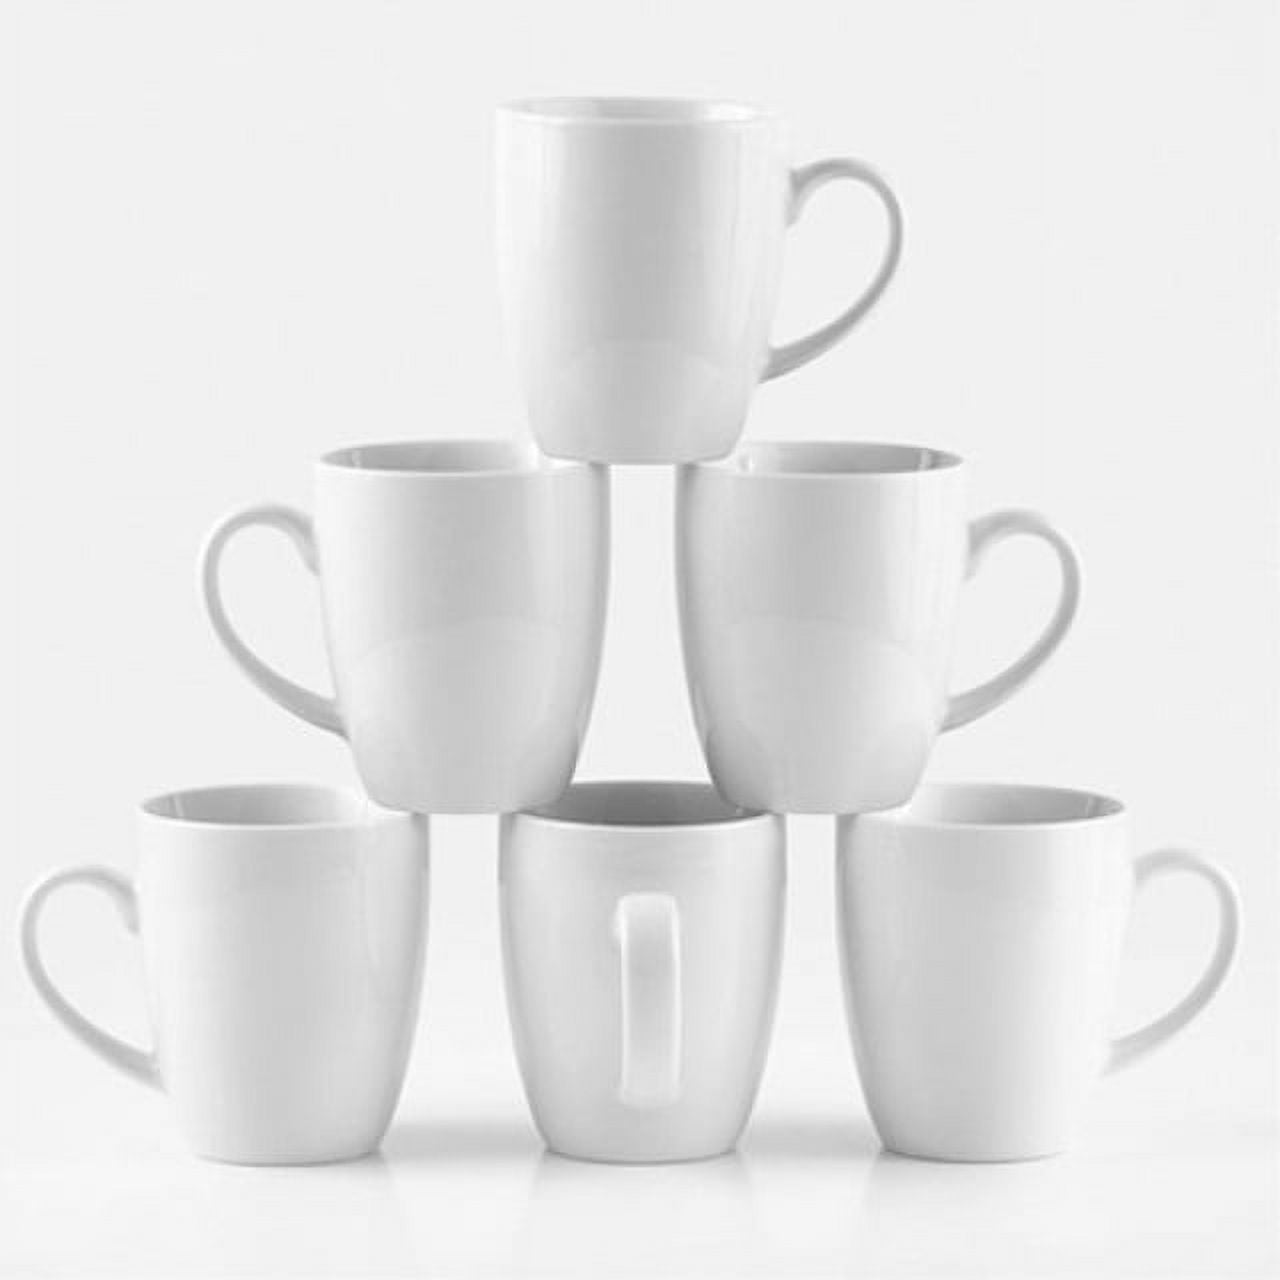 Hasense Coffee Mug Ceramic Set of 4 with Stand - 15 oz Stackable